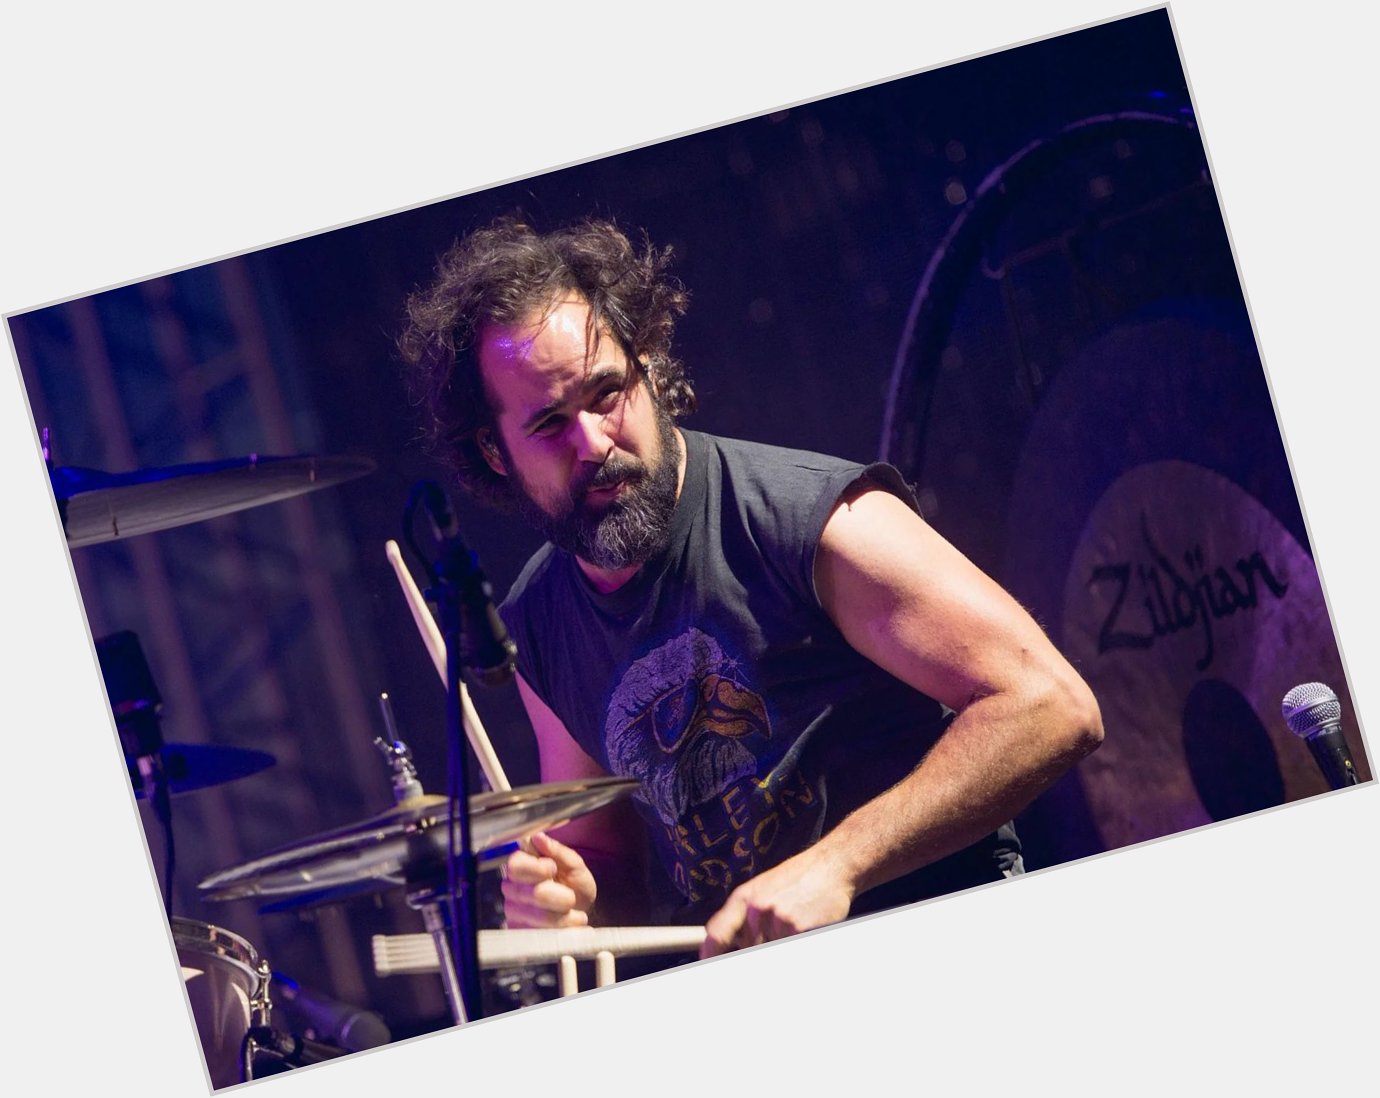 Happy birthday to Prime Minister Ronnie Vannucci 